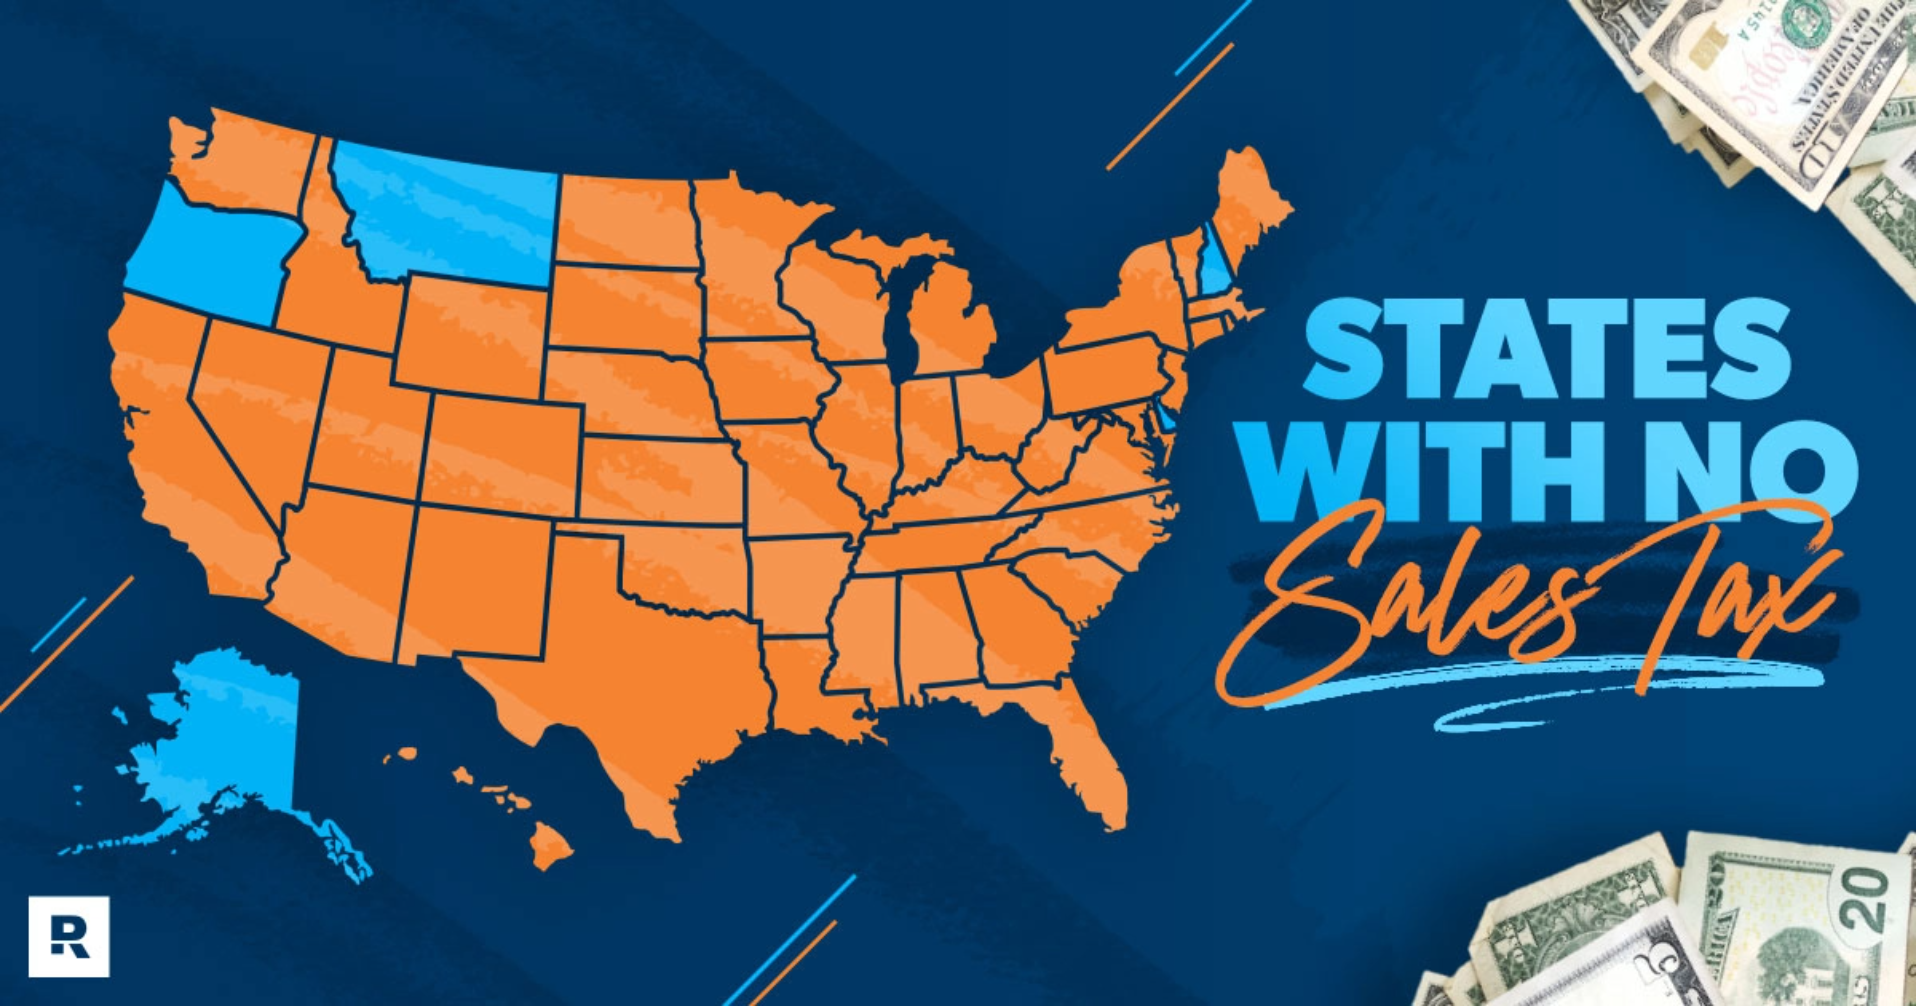 States with No Sales Tax blog header